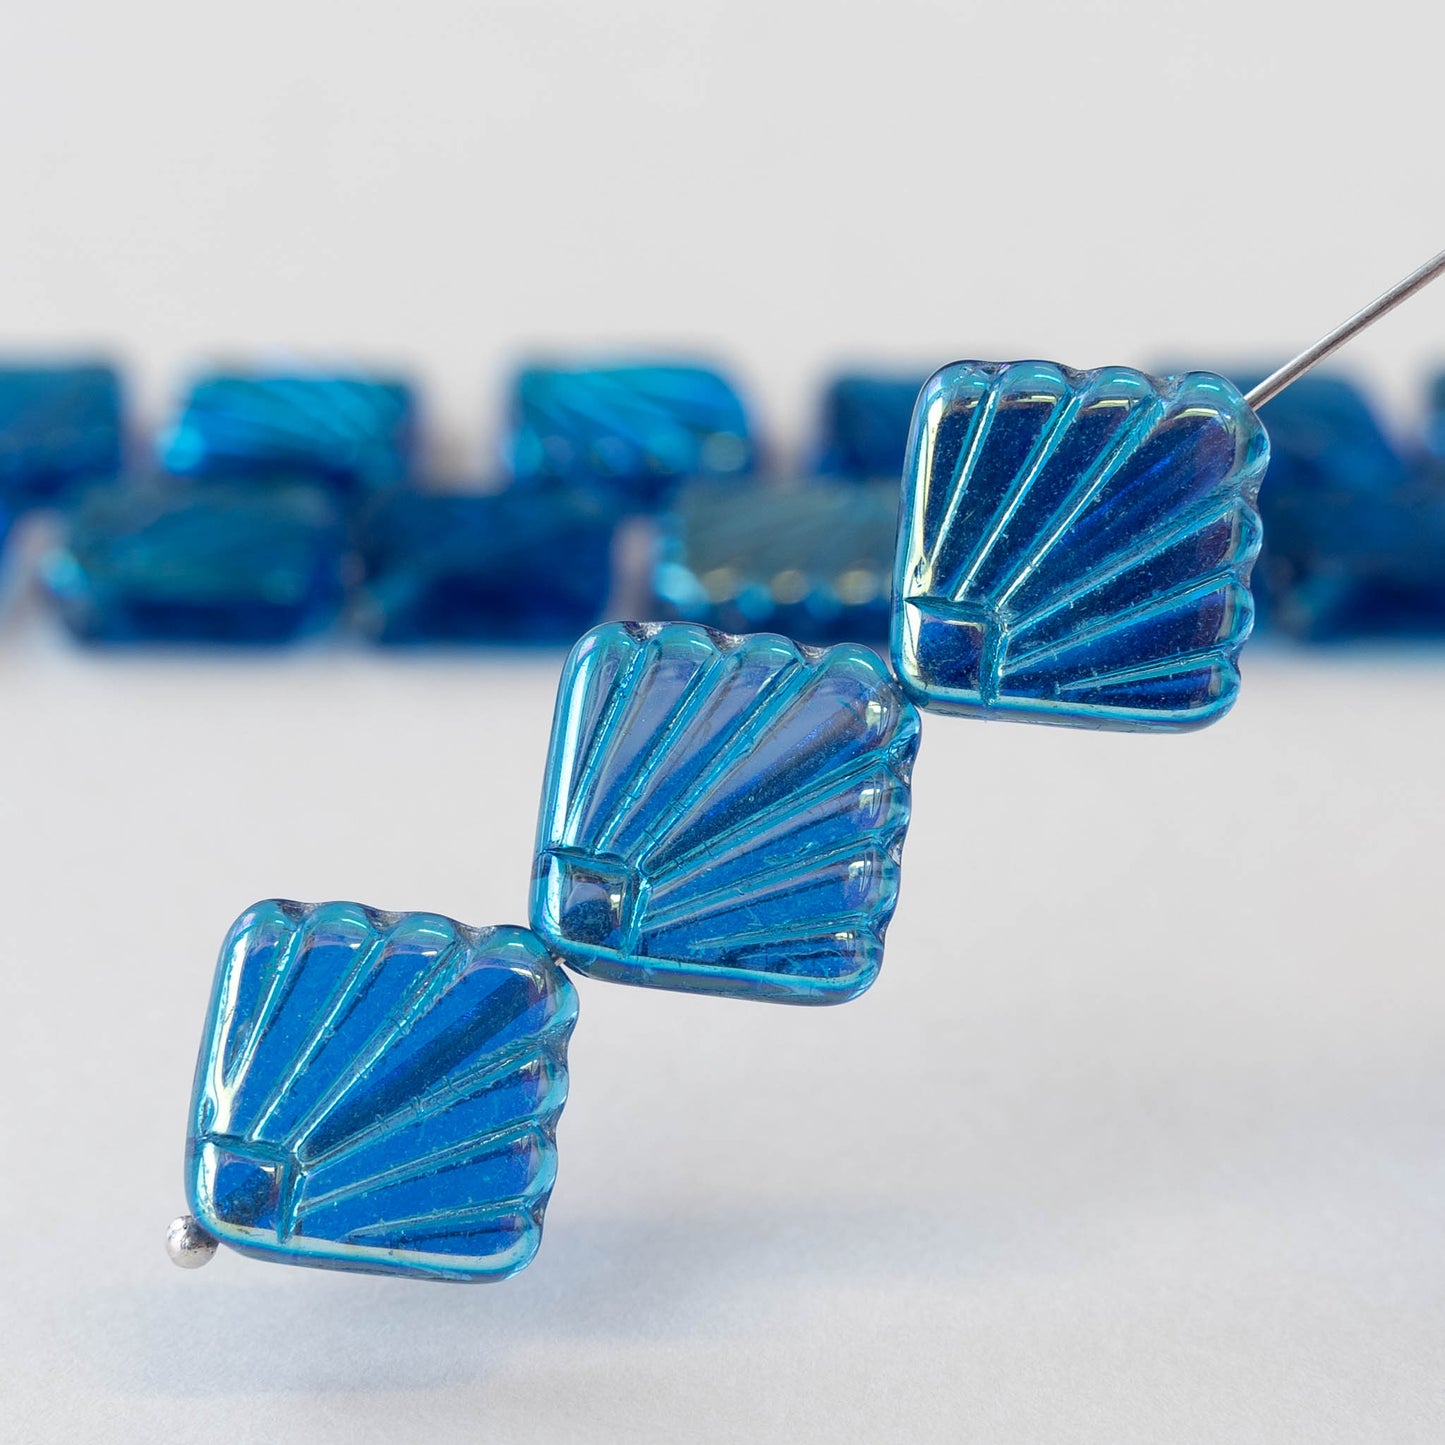 Load image into Gallery viewer, 14mm Diafan Beads - Sapphire Blue AB - 8 Beads
